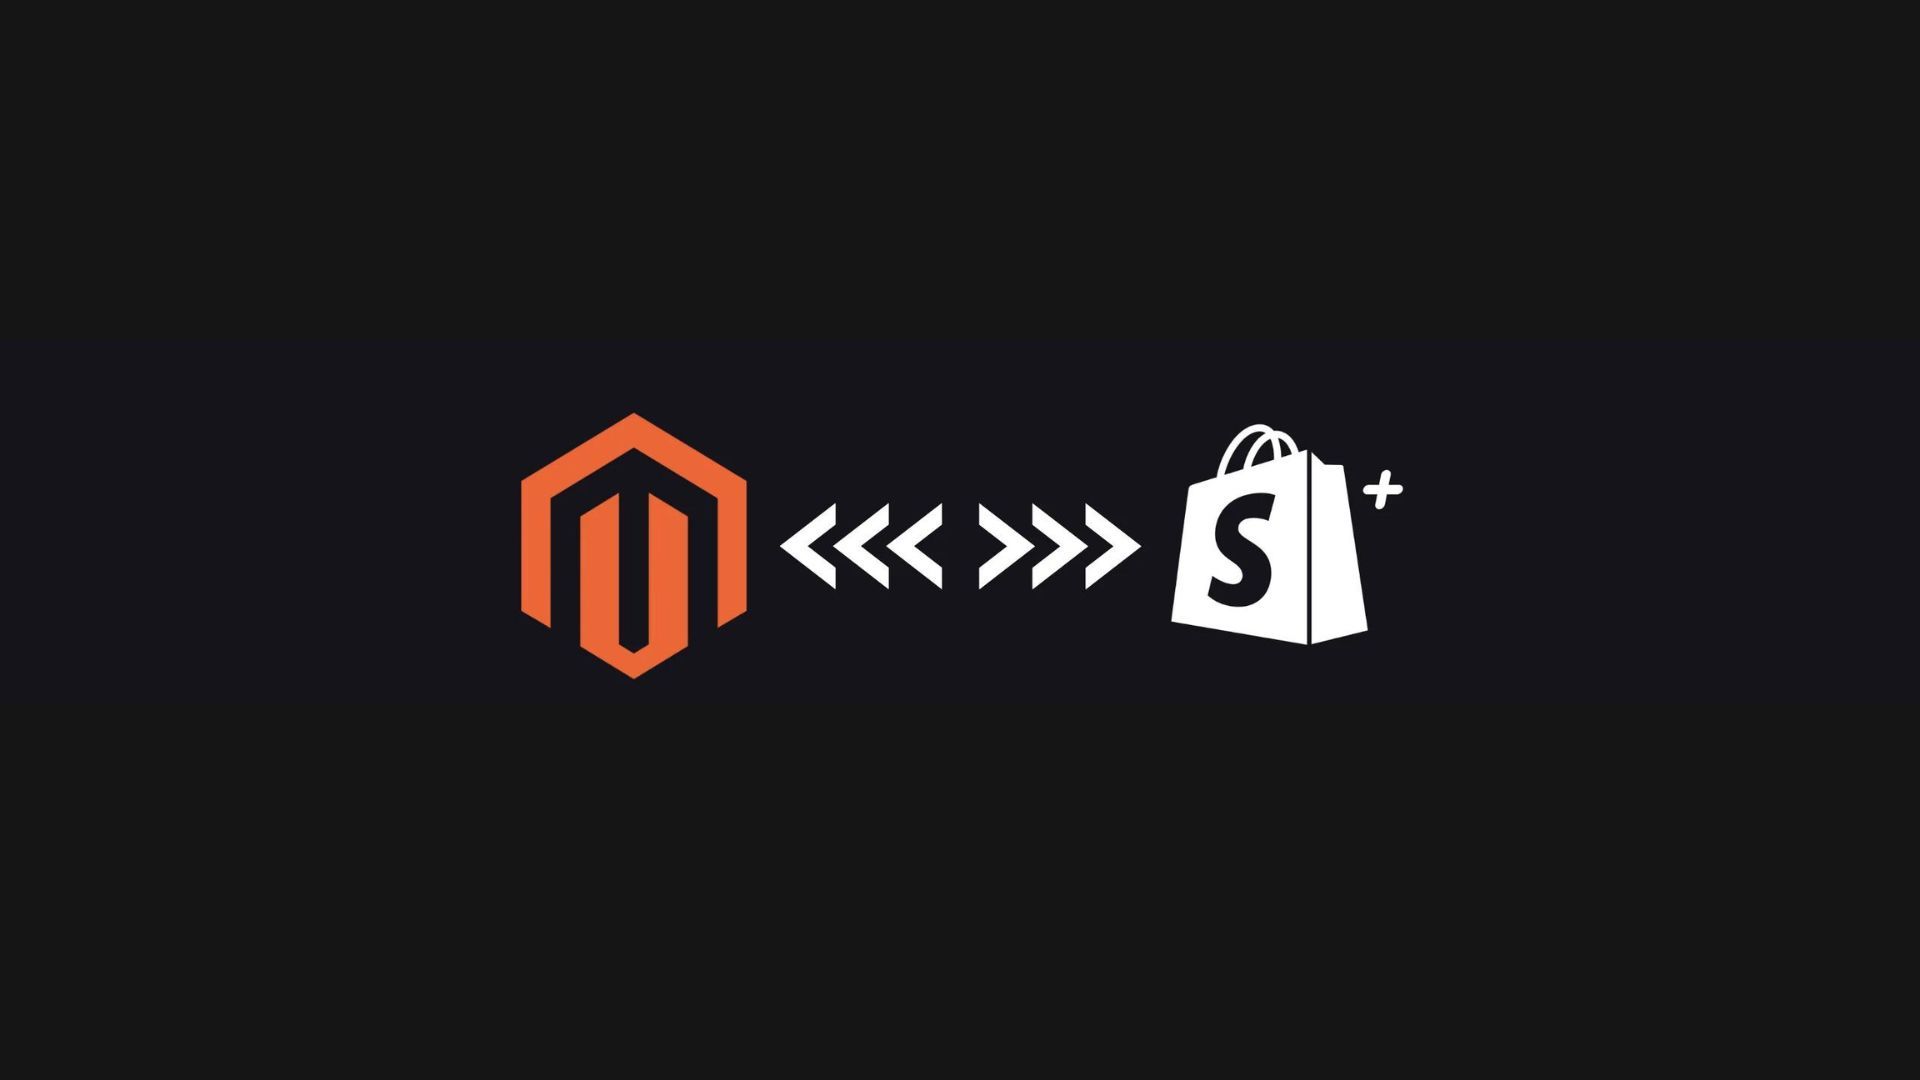 A magento logo and a shopify logo on a black background.